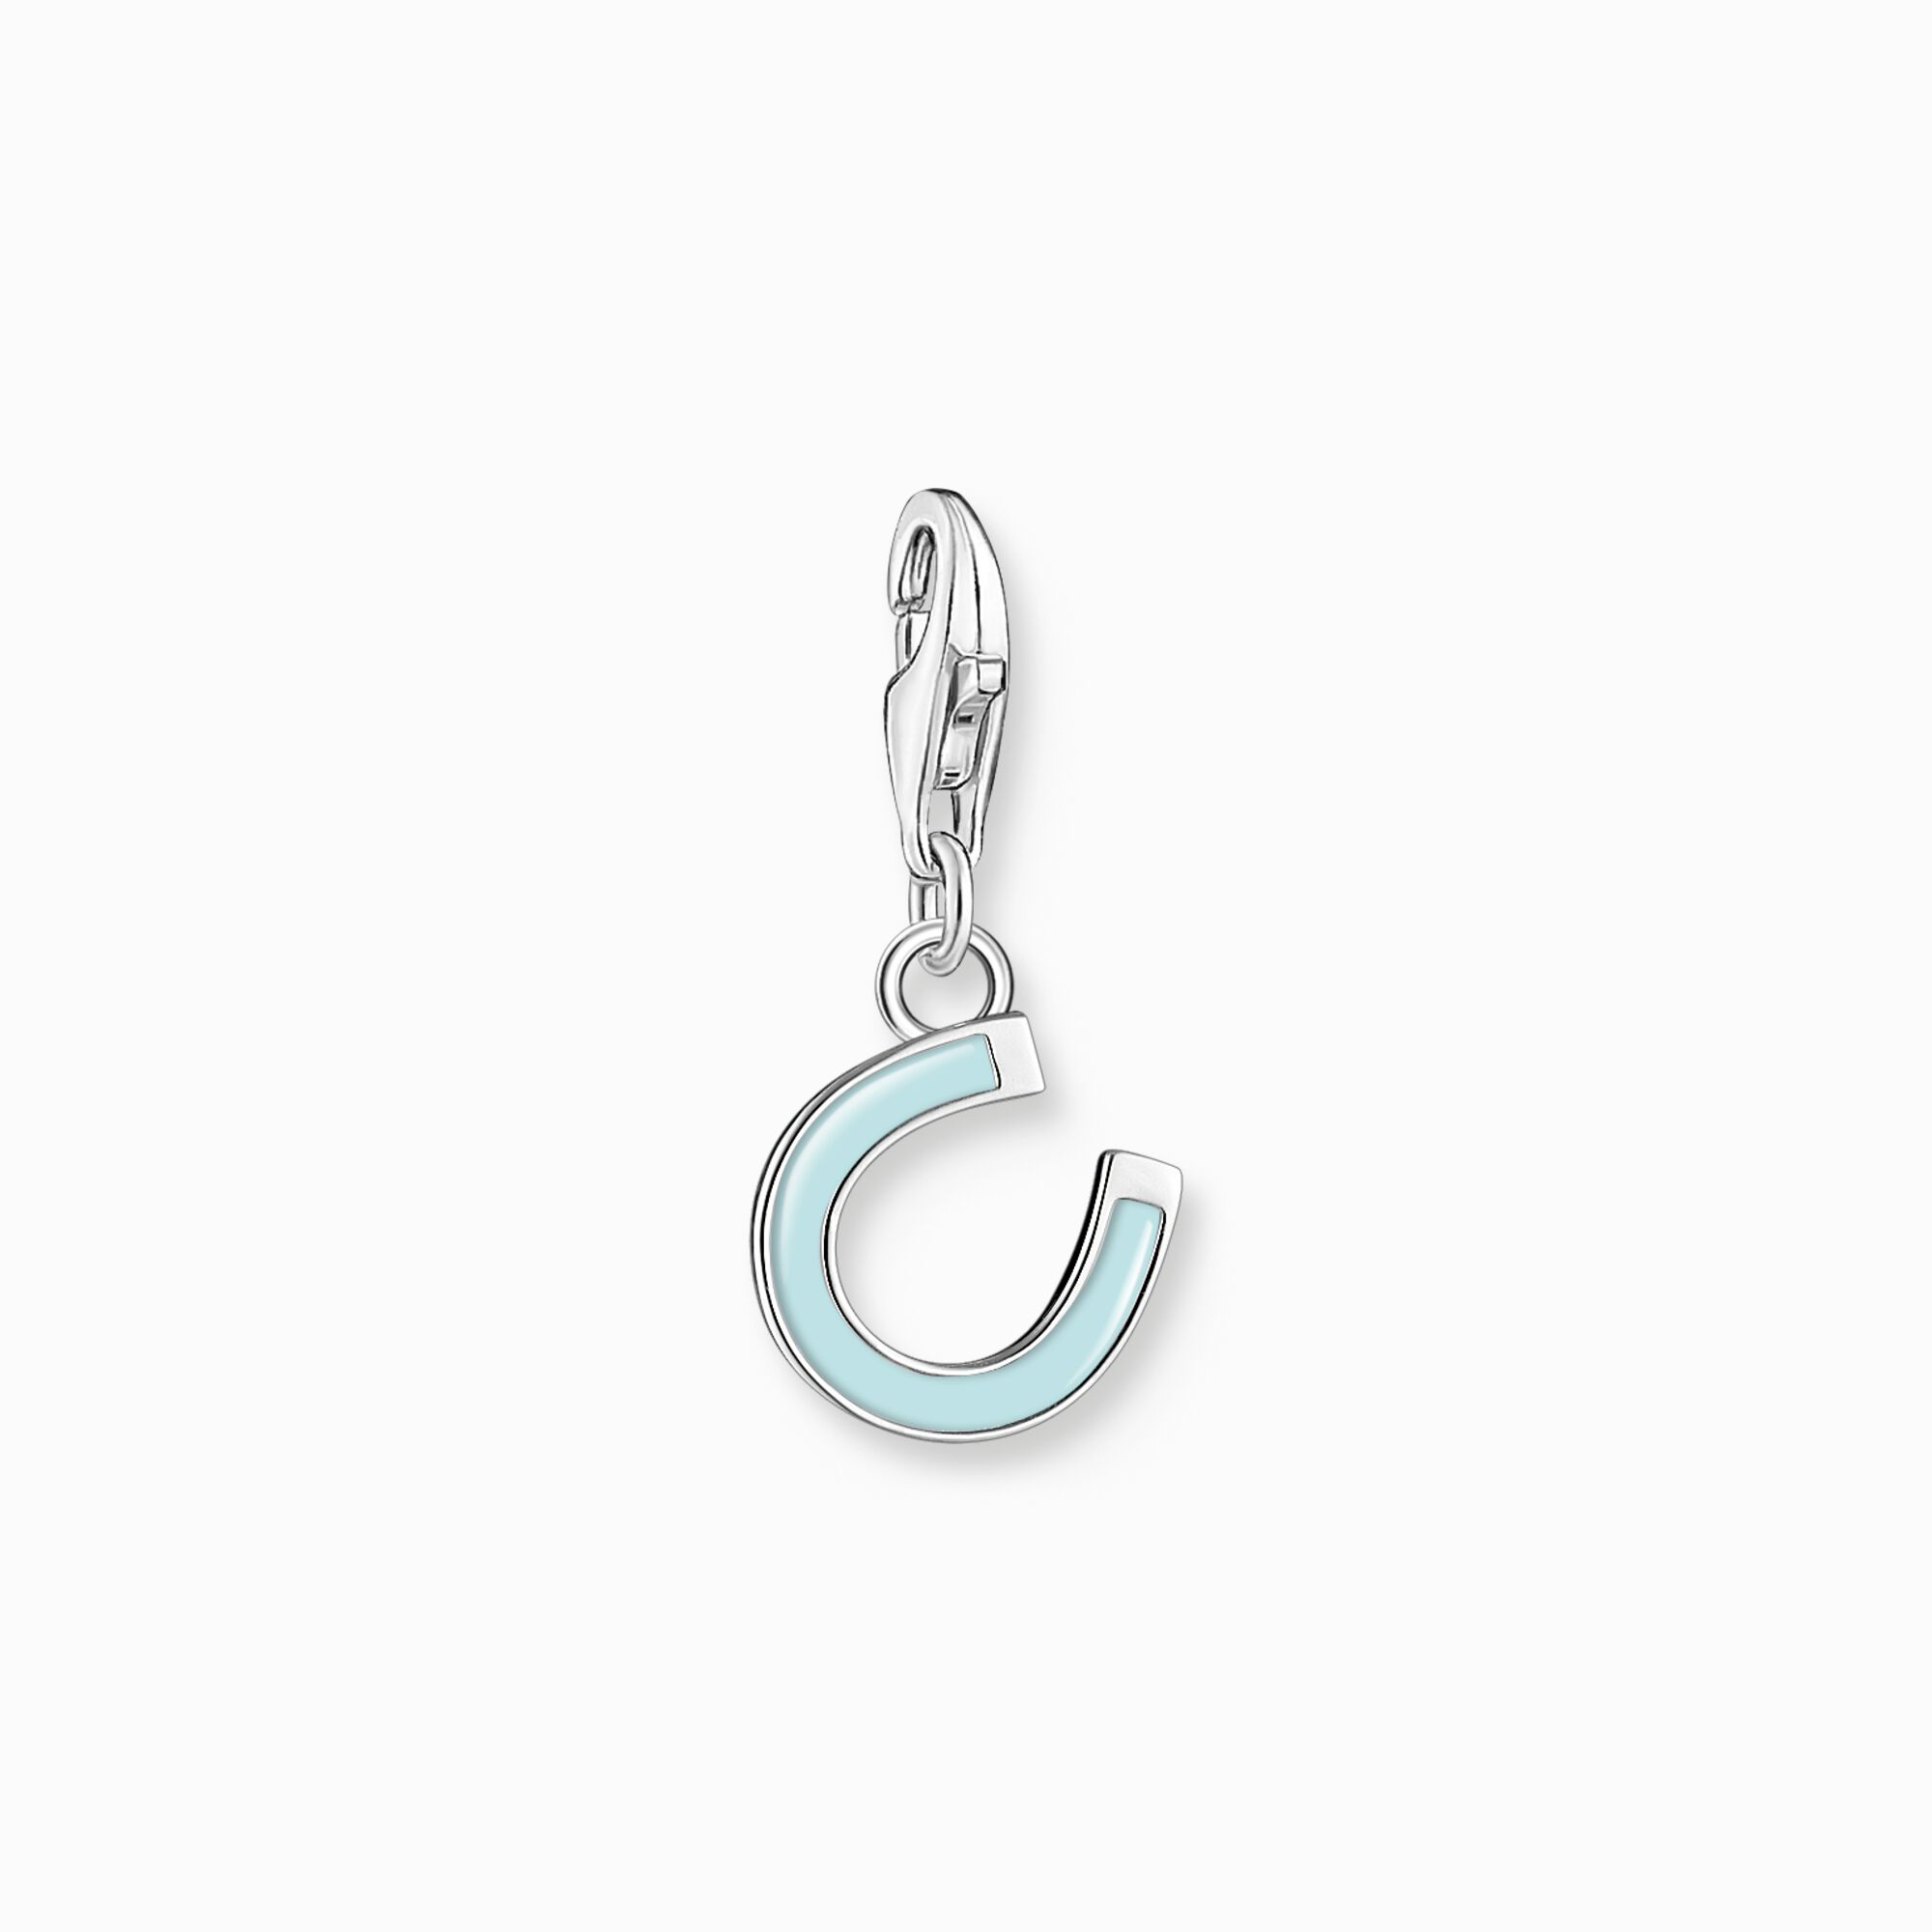 Charm pendant mint green horseshoe silver from the Charm Club collection in the THOMAS SABO online store